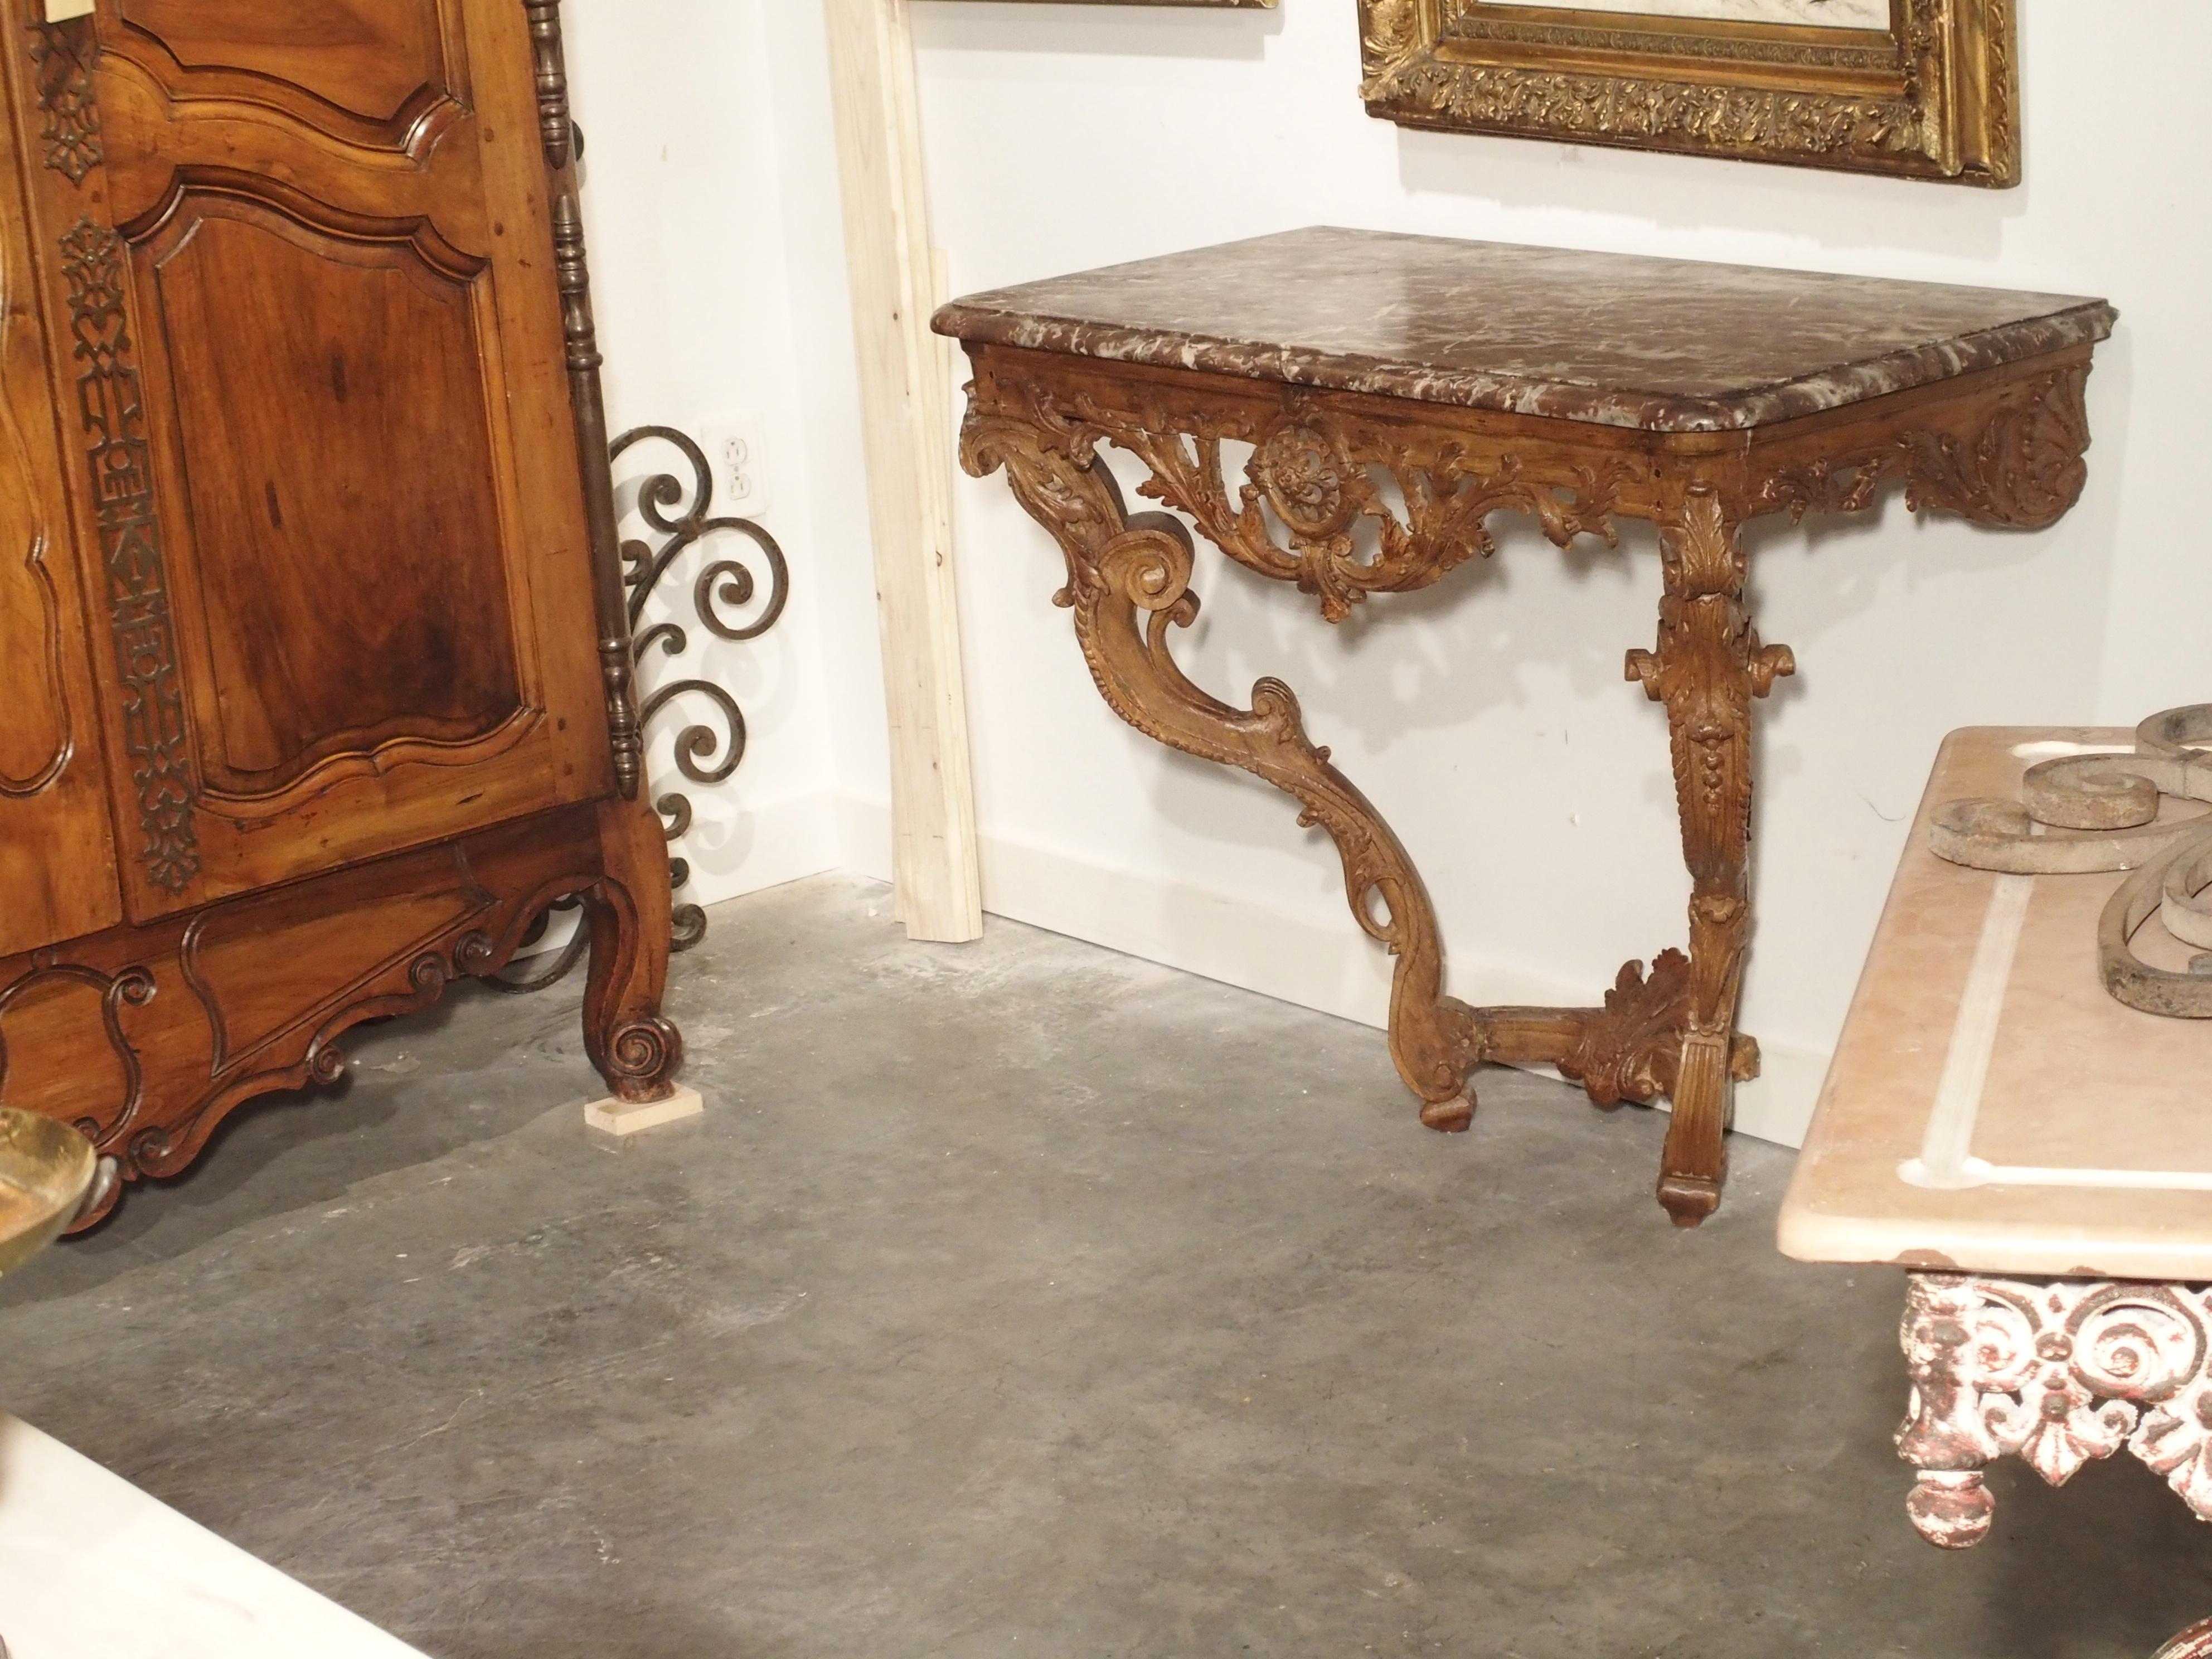 This is a very fine, period French Regence oak console with a rouge marble top. The rectangular frieze has hand carved scrolling acanthus leaves extending to either side of a central circular motif. This motif is reticulated into 8 larger circles